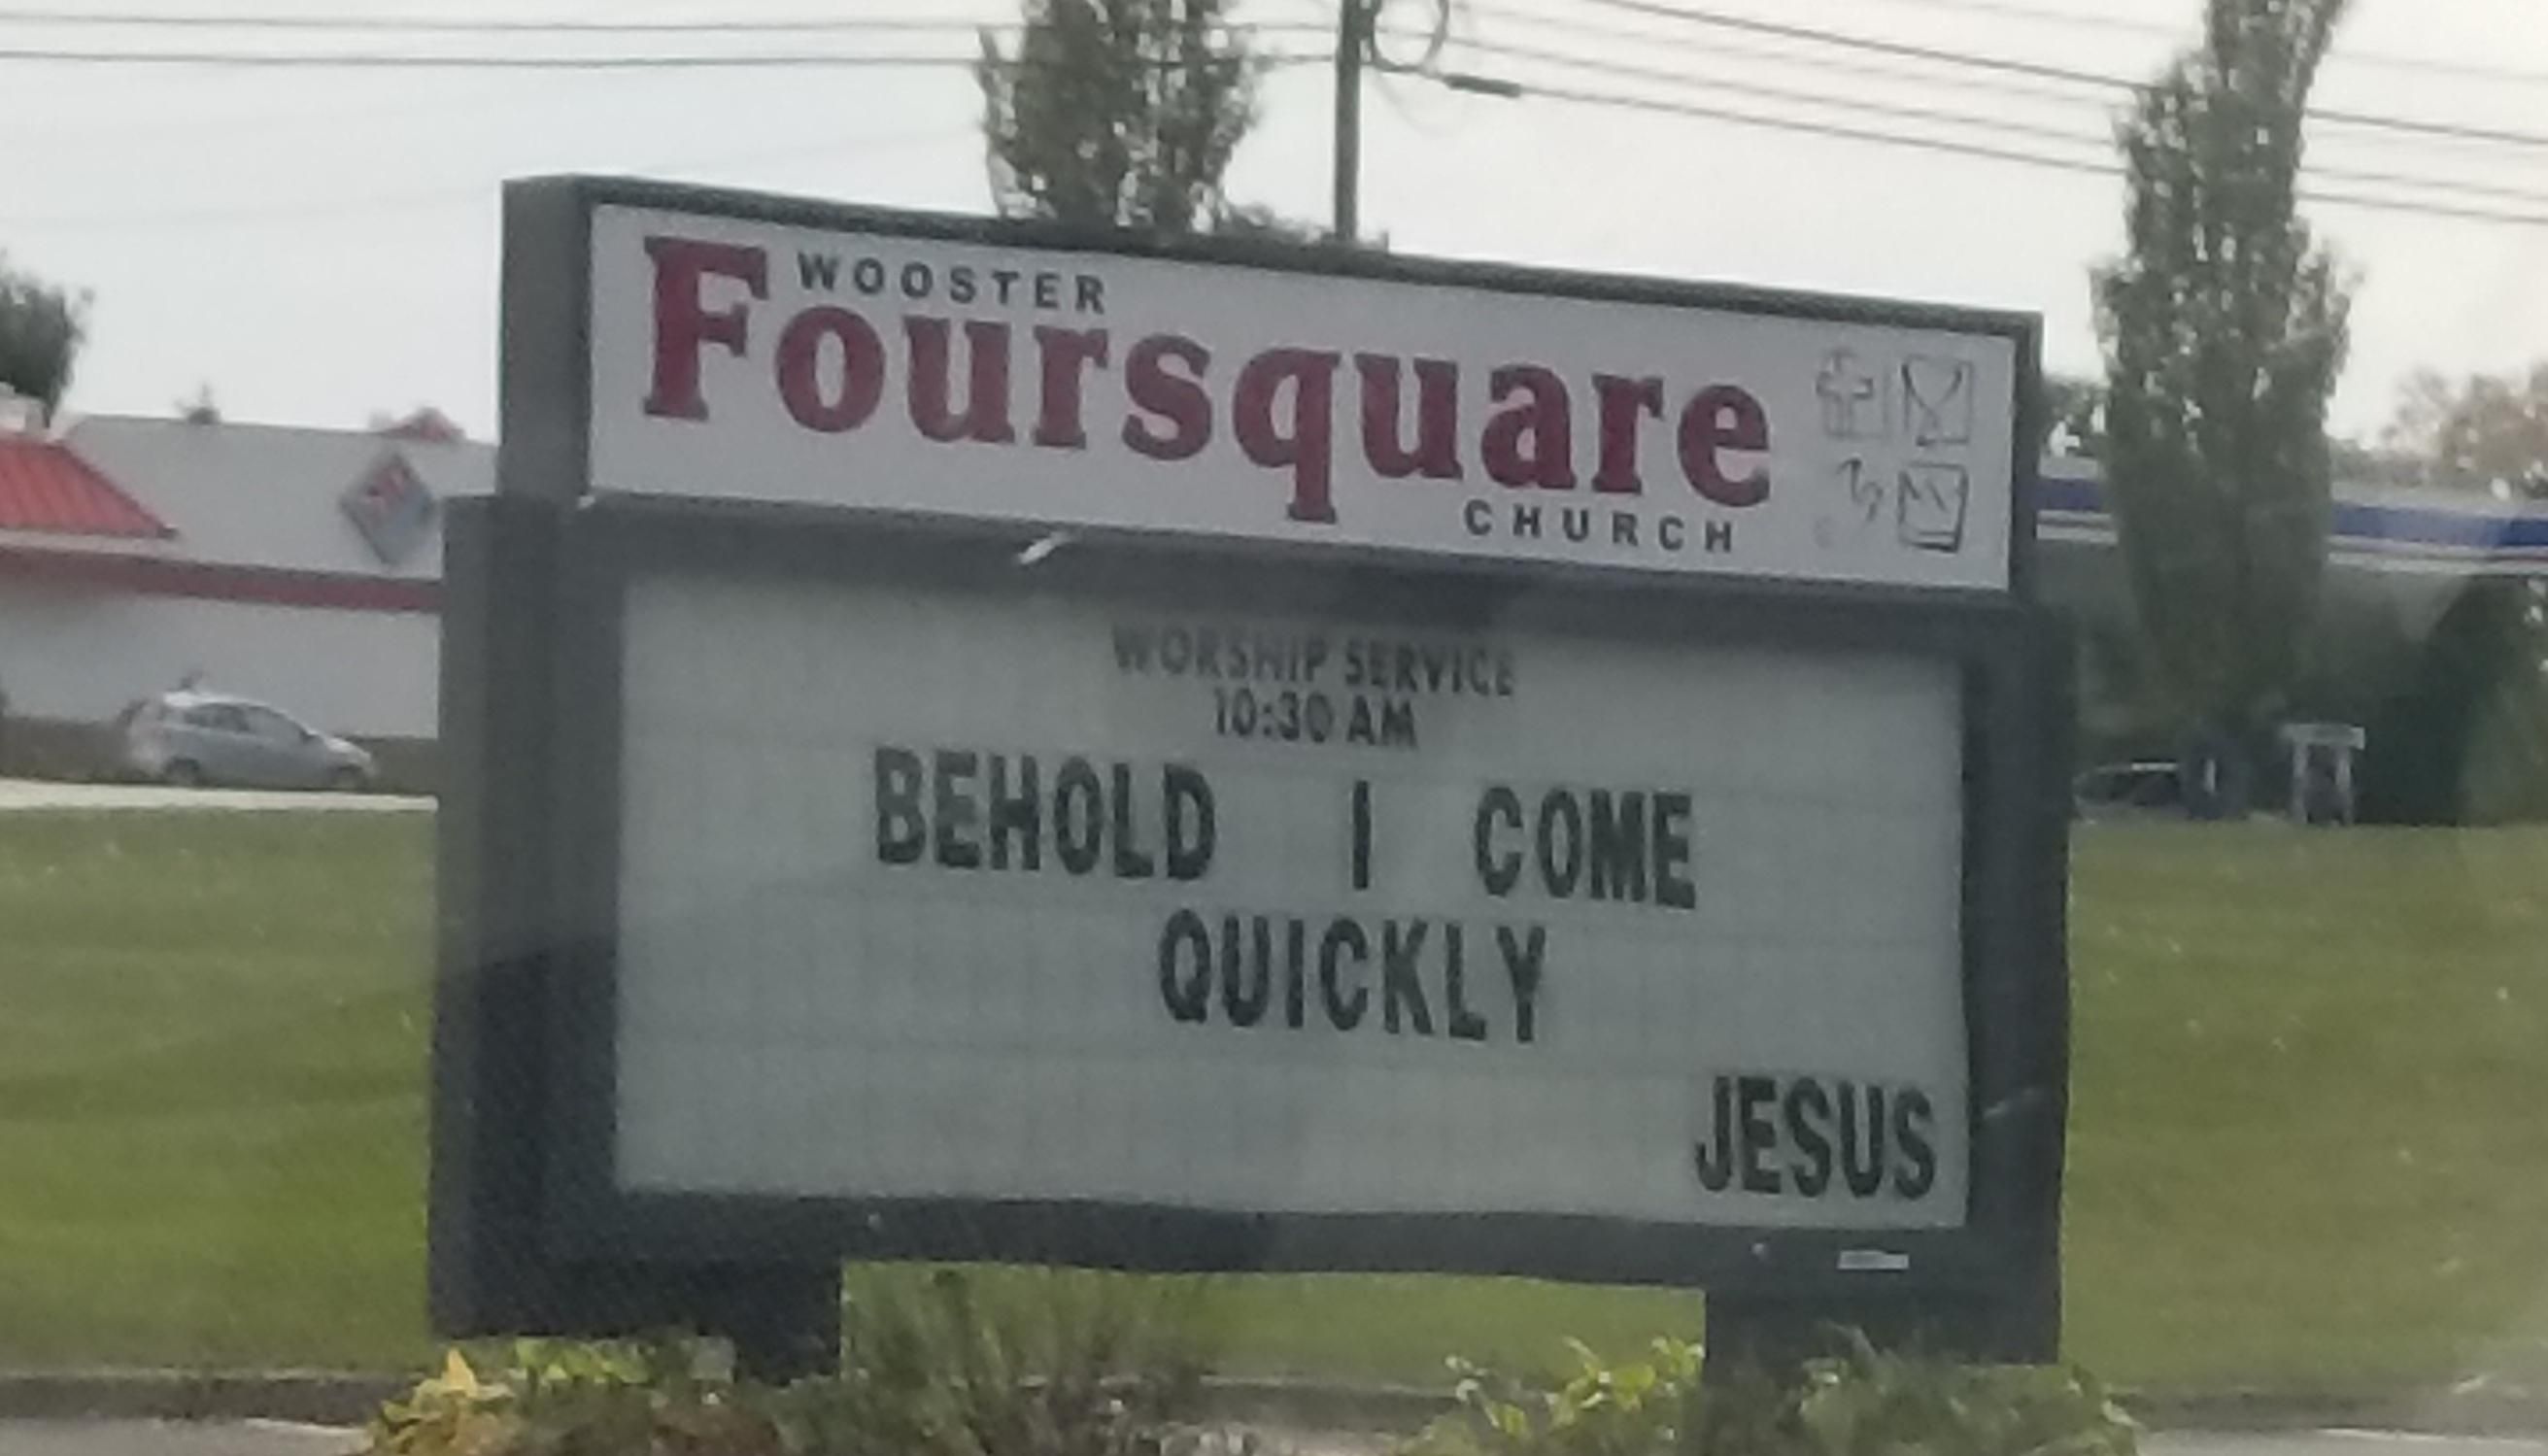 It's nice to know that Jesus has the same problem as me.